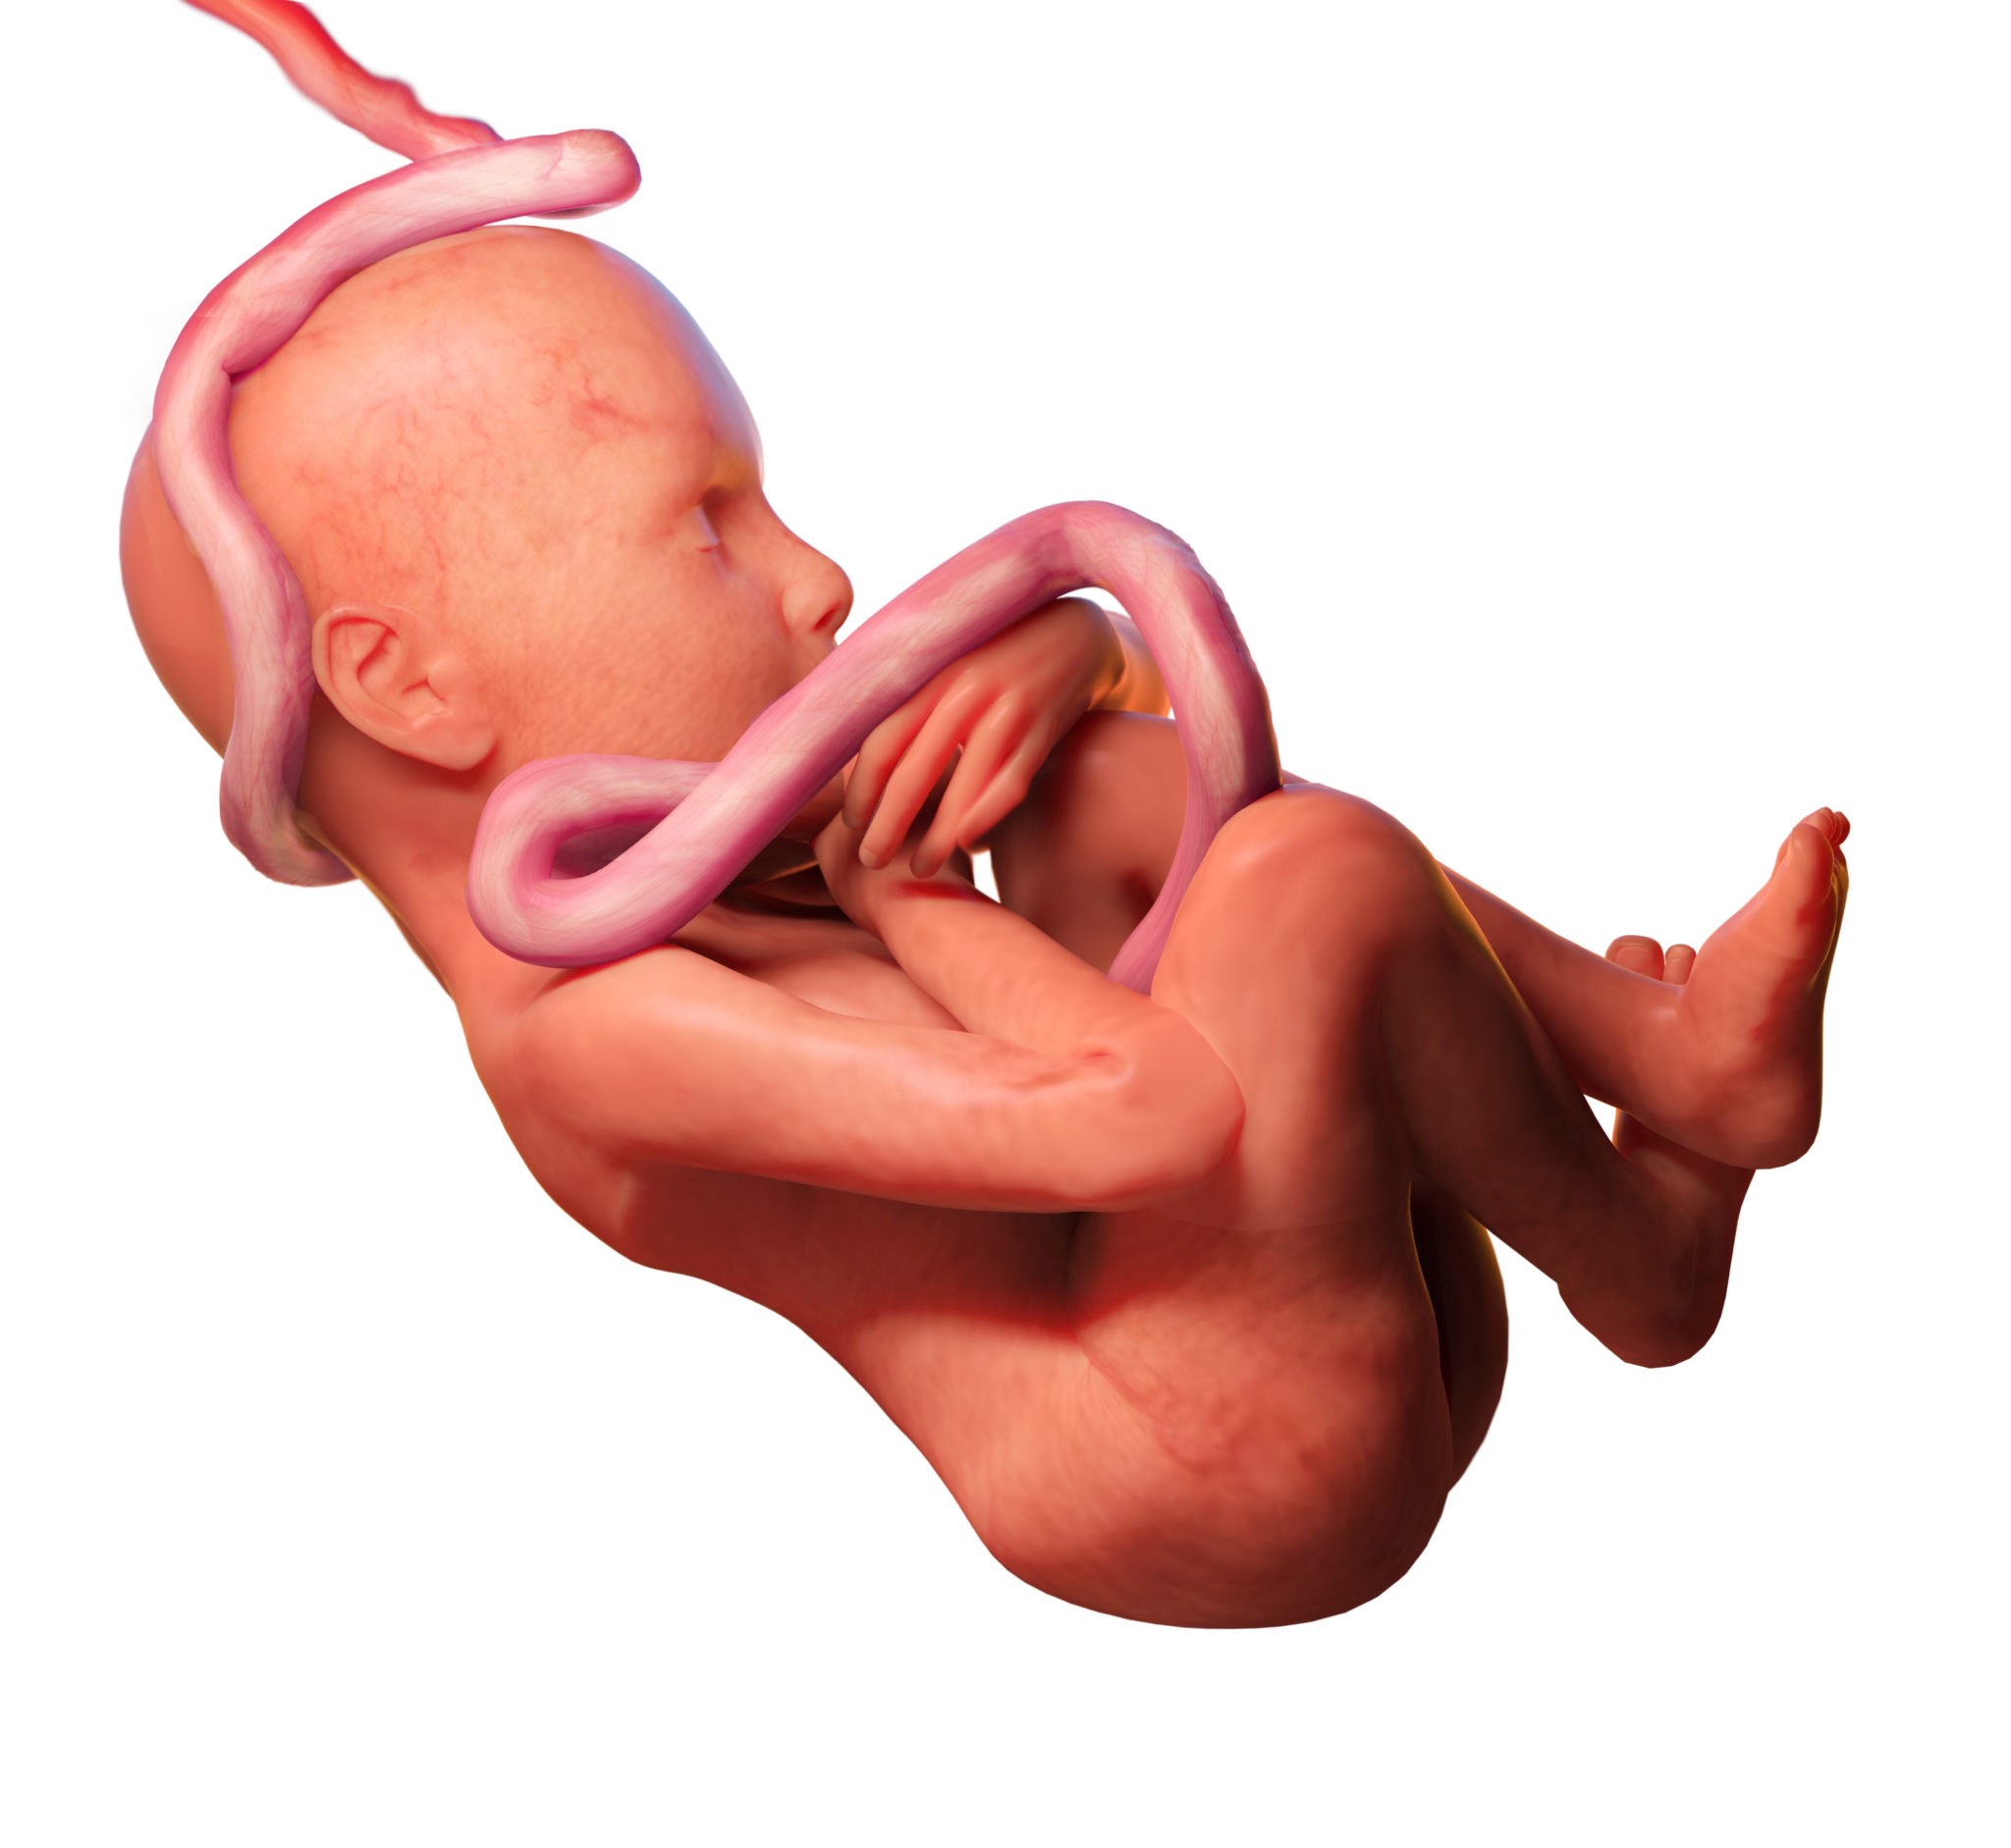 Umbilical Cord Compression: Causes and Signs